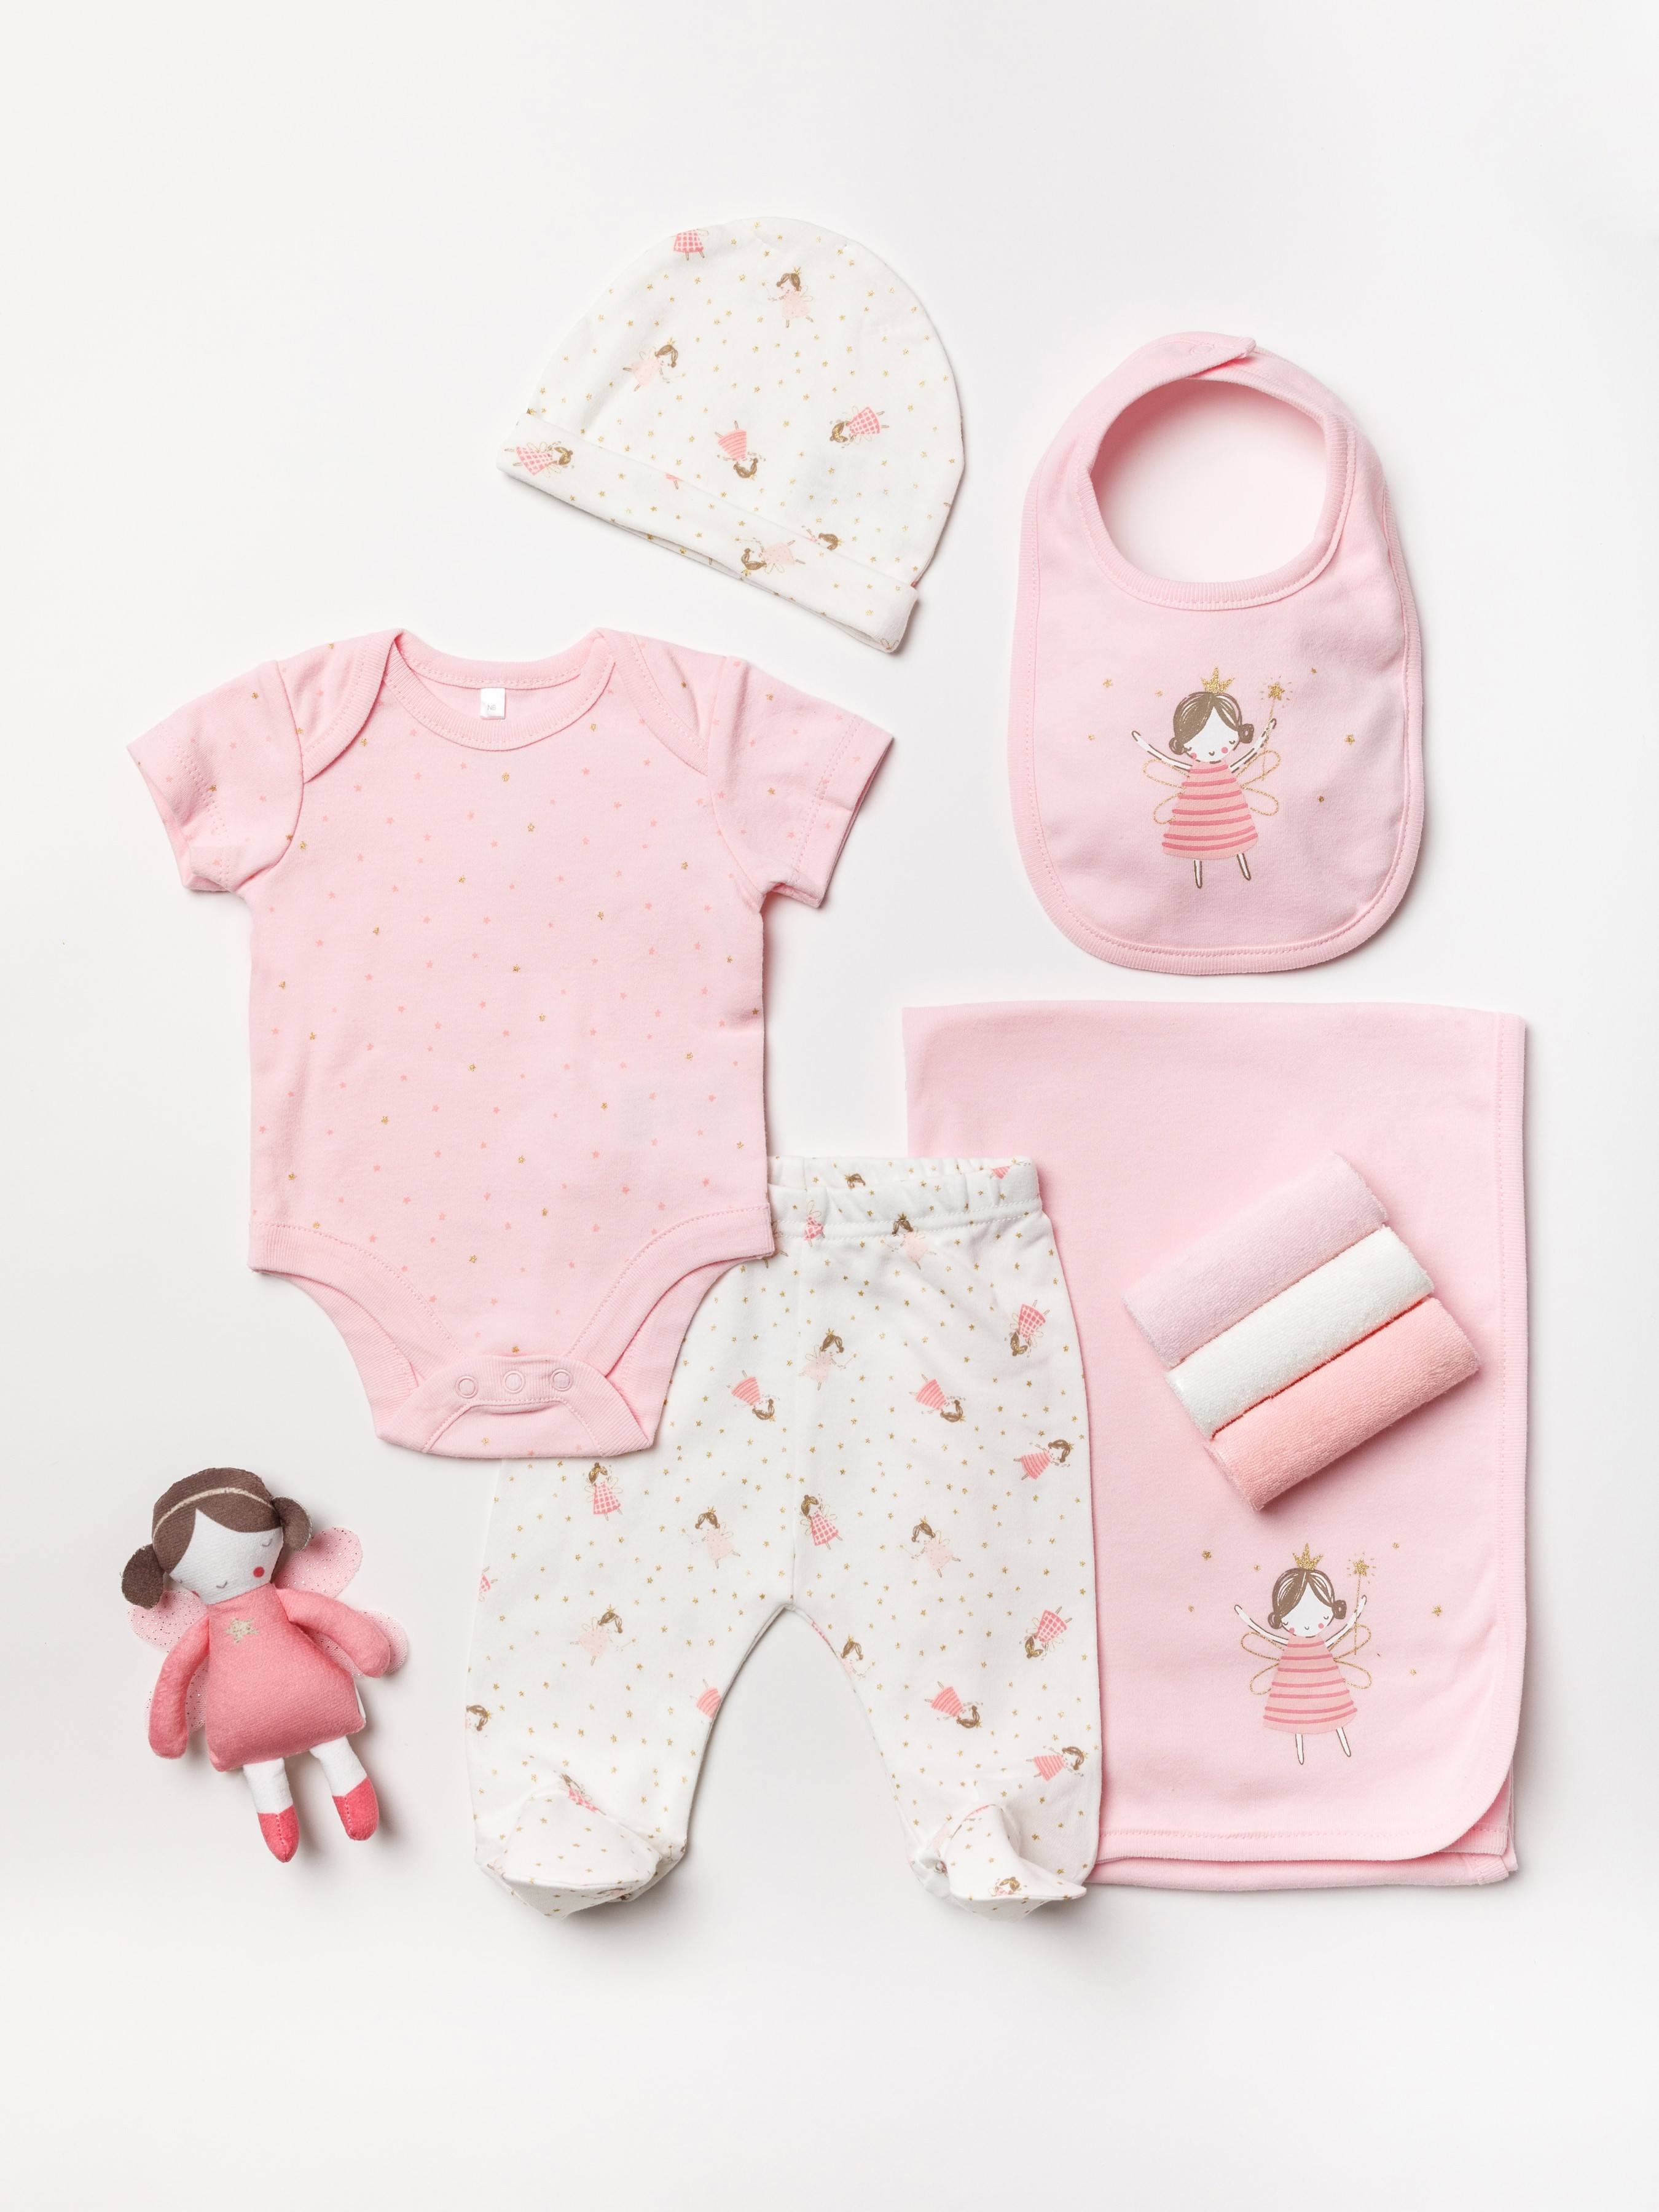 Rock A Bye Baby 'Fairy' Baby Girls 10 Pieces Gift Set in Net Bag PACK OF 4